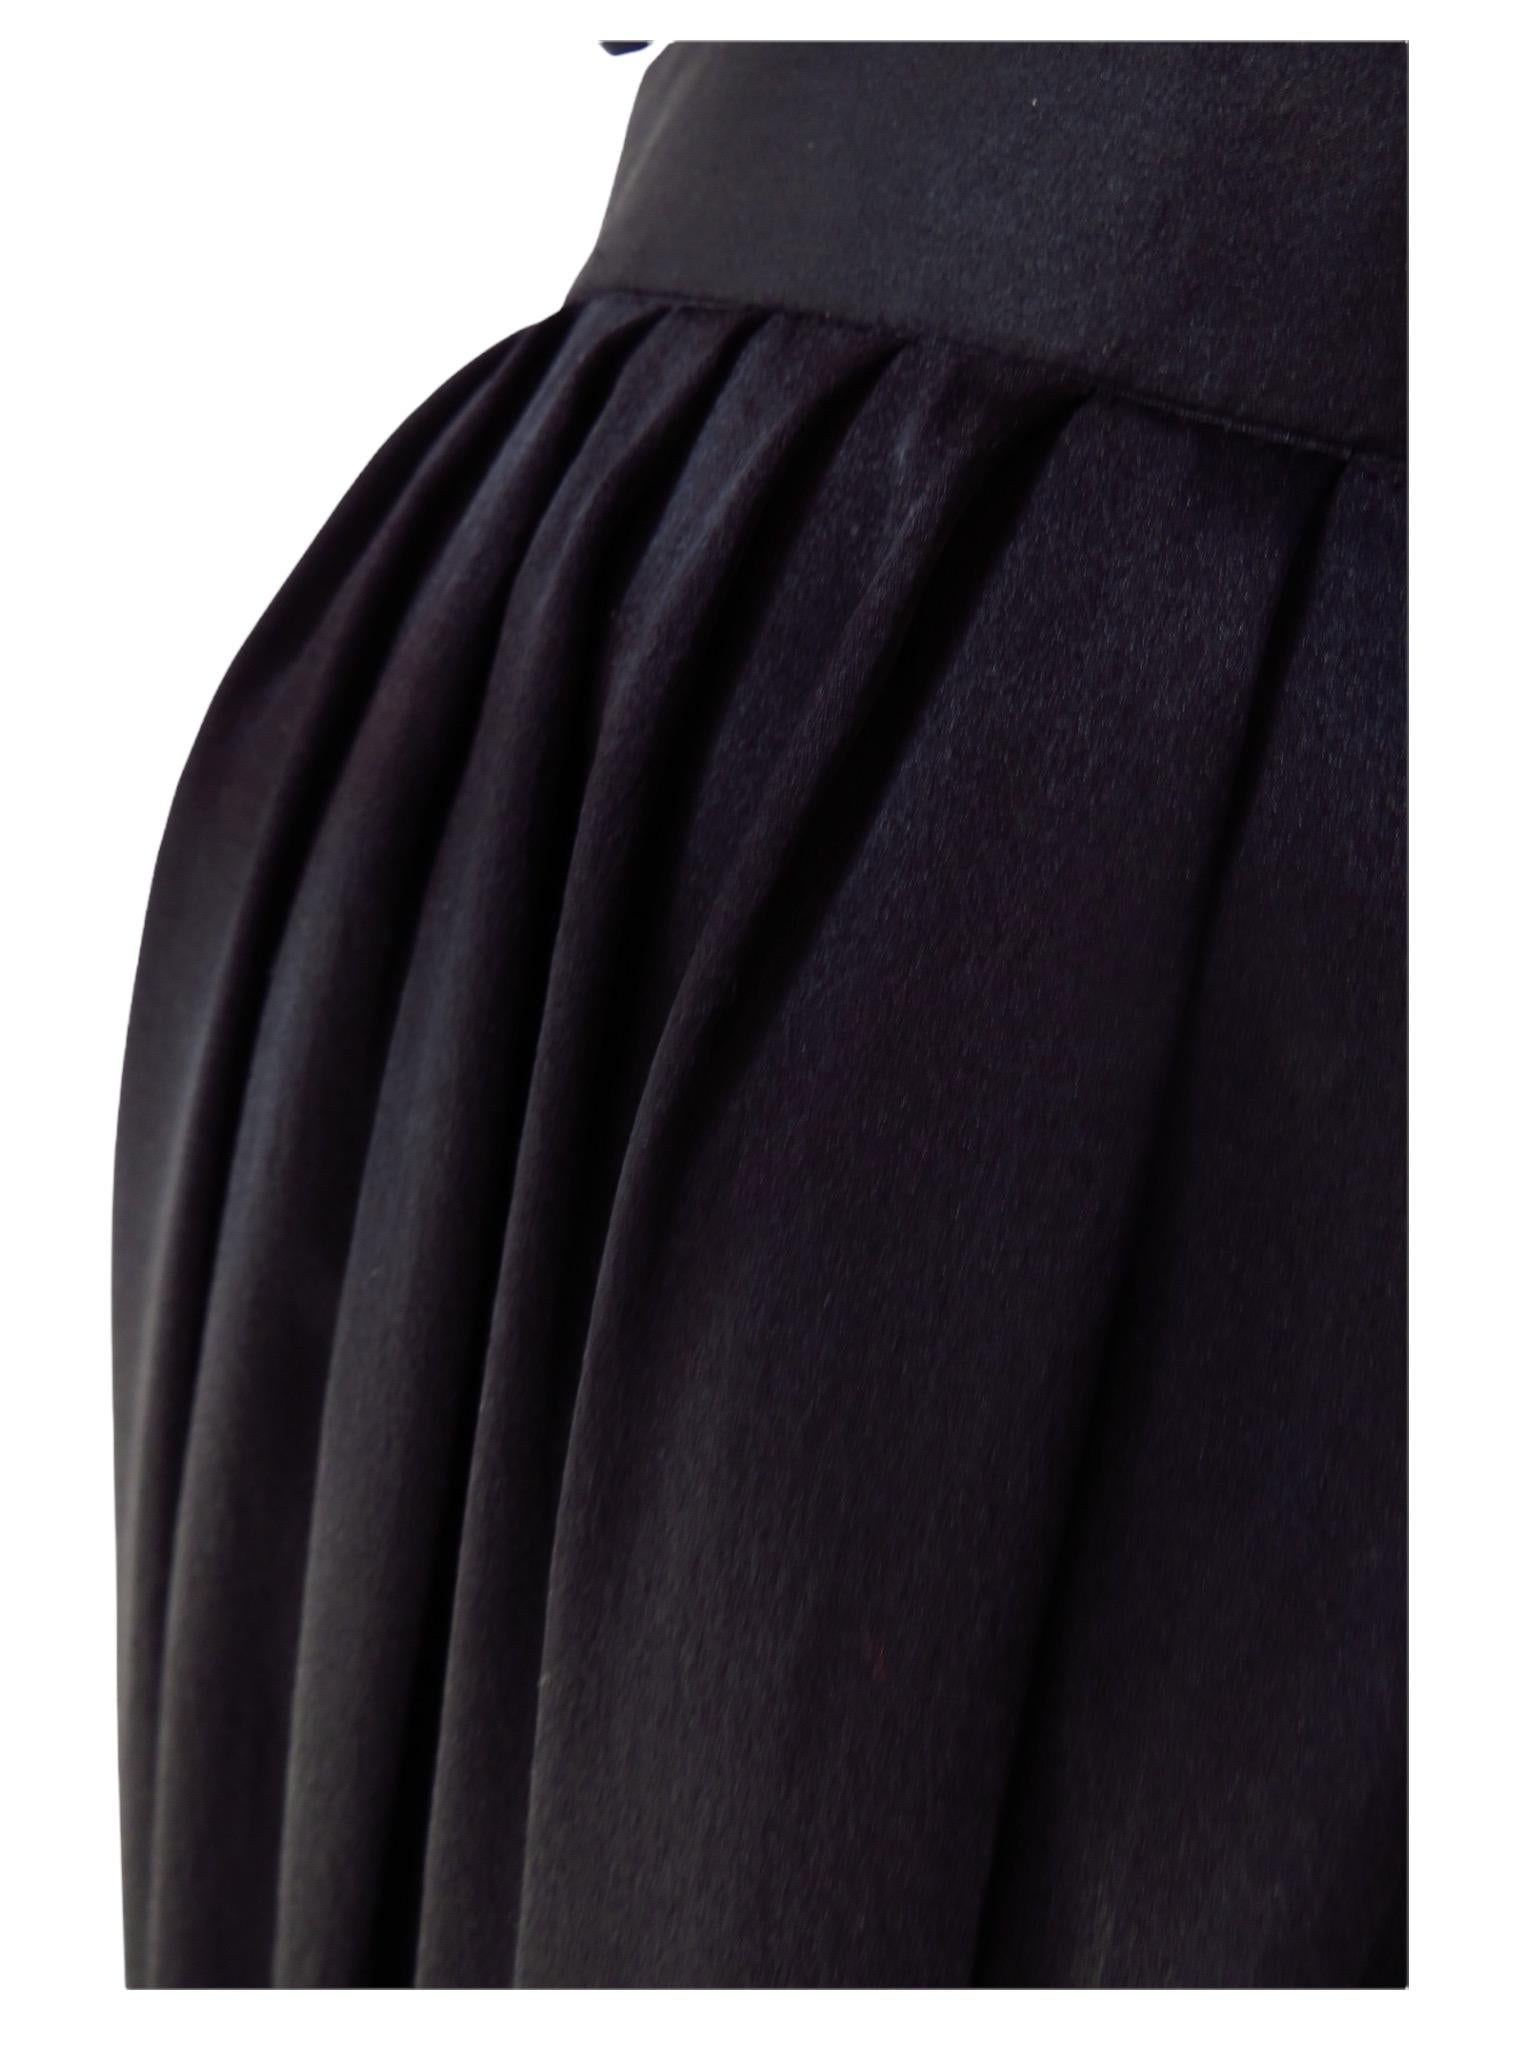 Undercover Black Pleated Silk Harem Pants For Sale 3